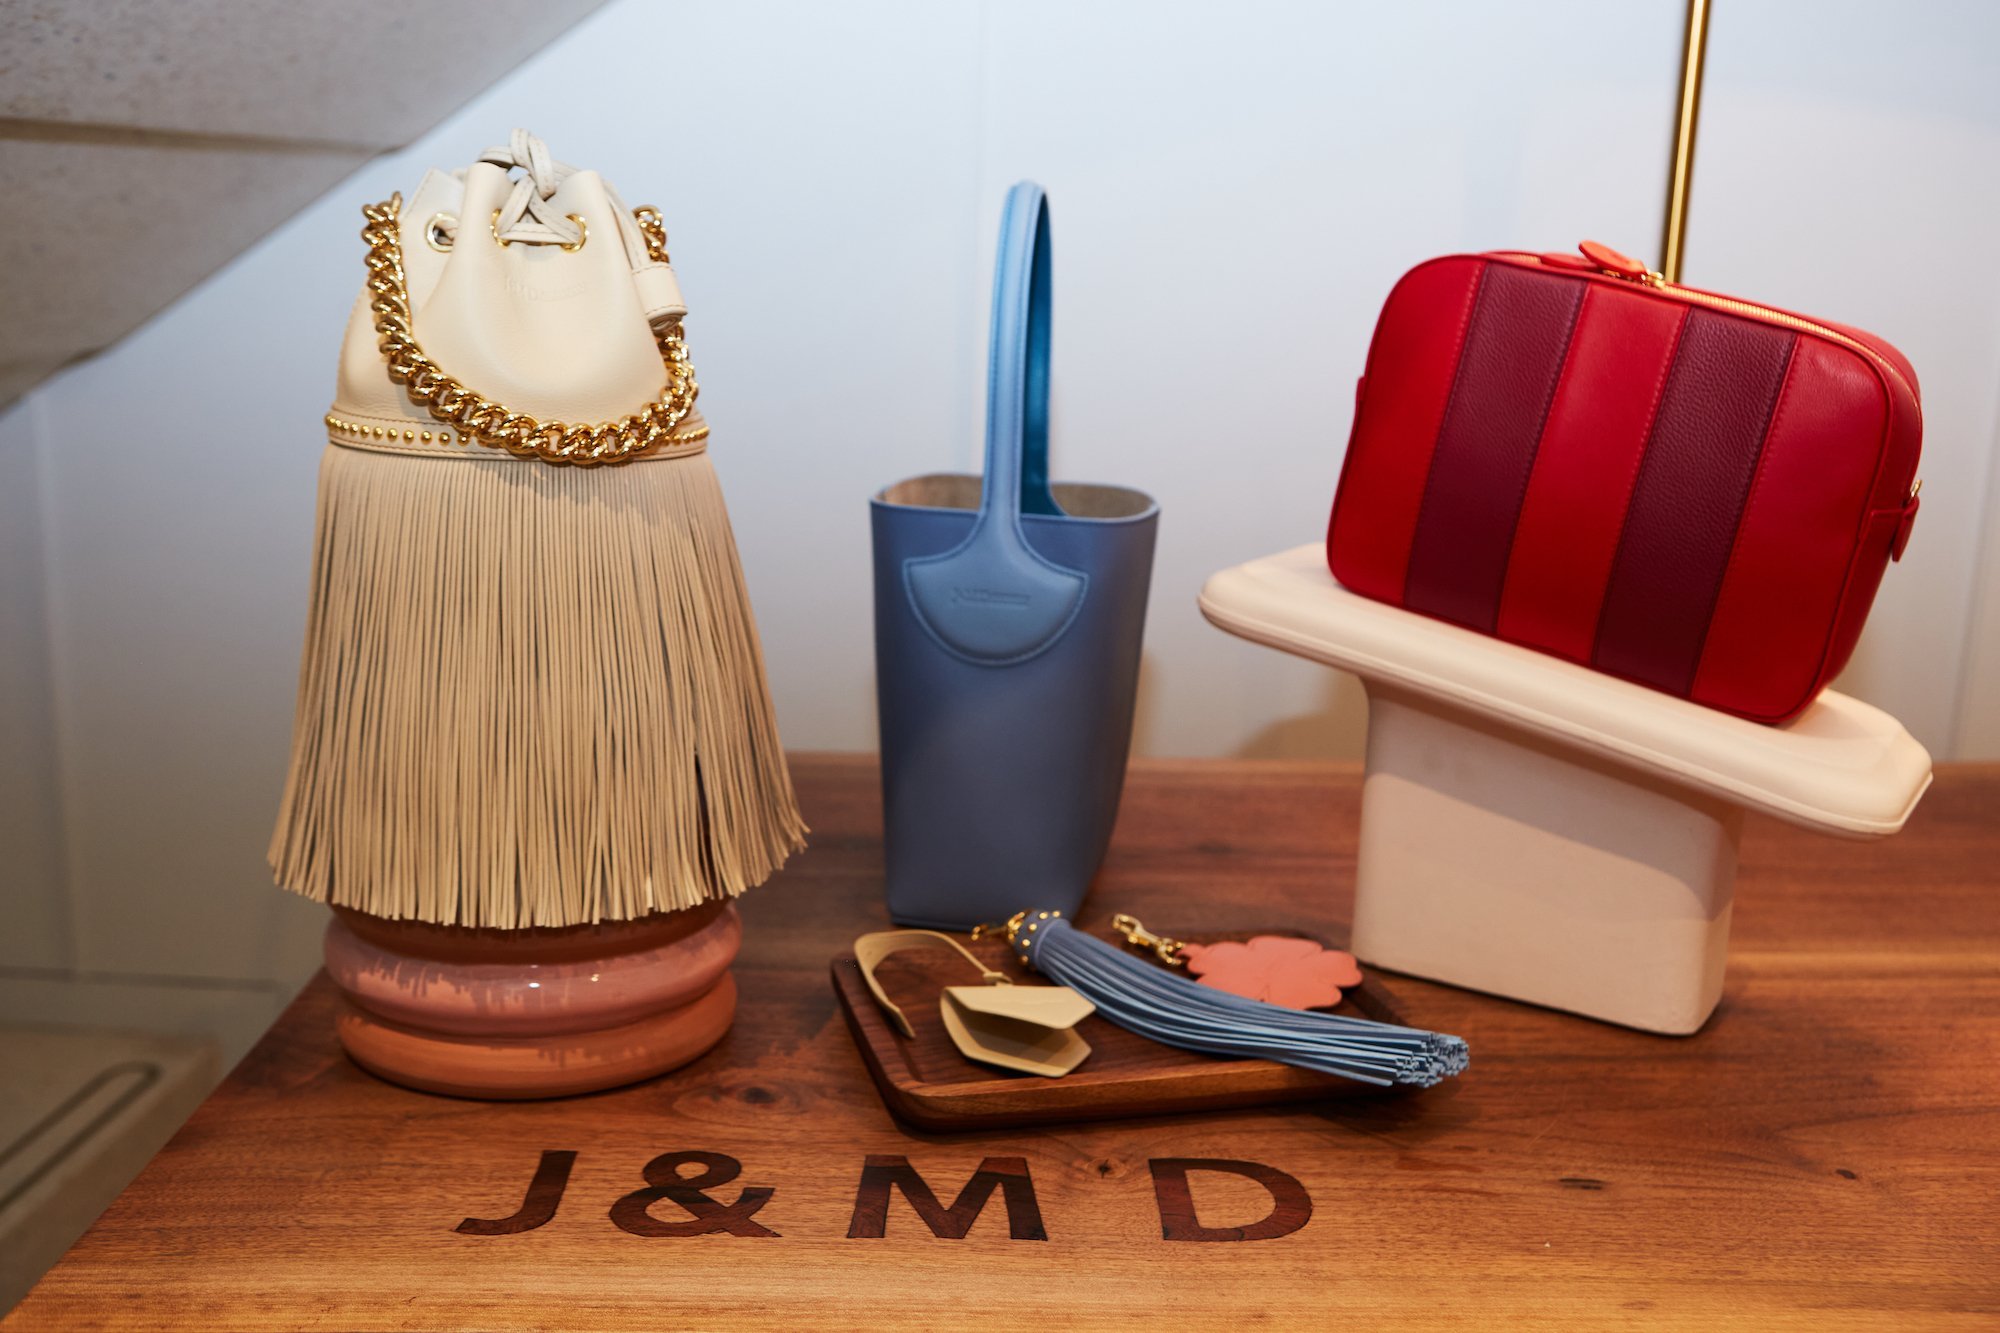 A wonderful event at the J&amp;amp;M Davidson store in London to celebrate the launch of the bag collaboration with Halfpenny London